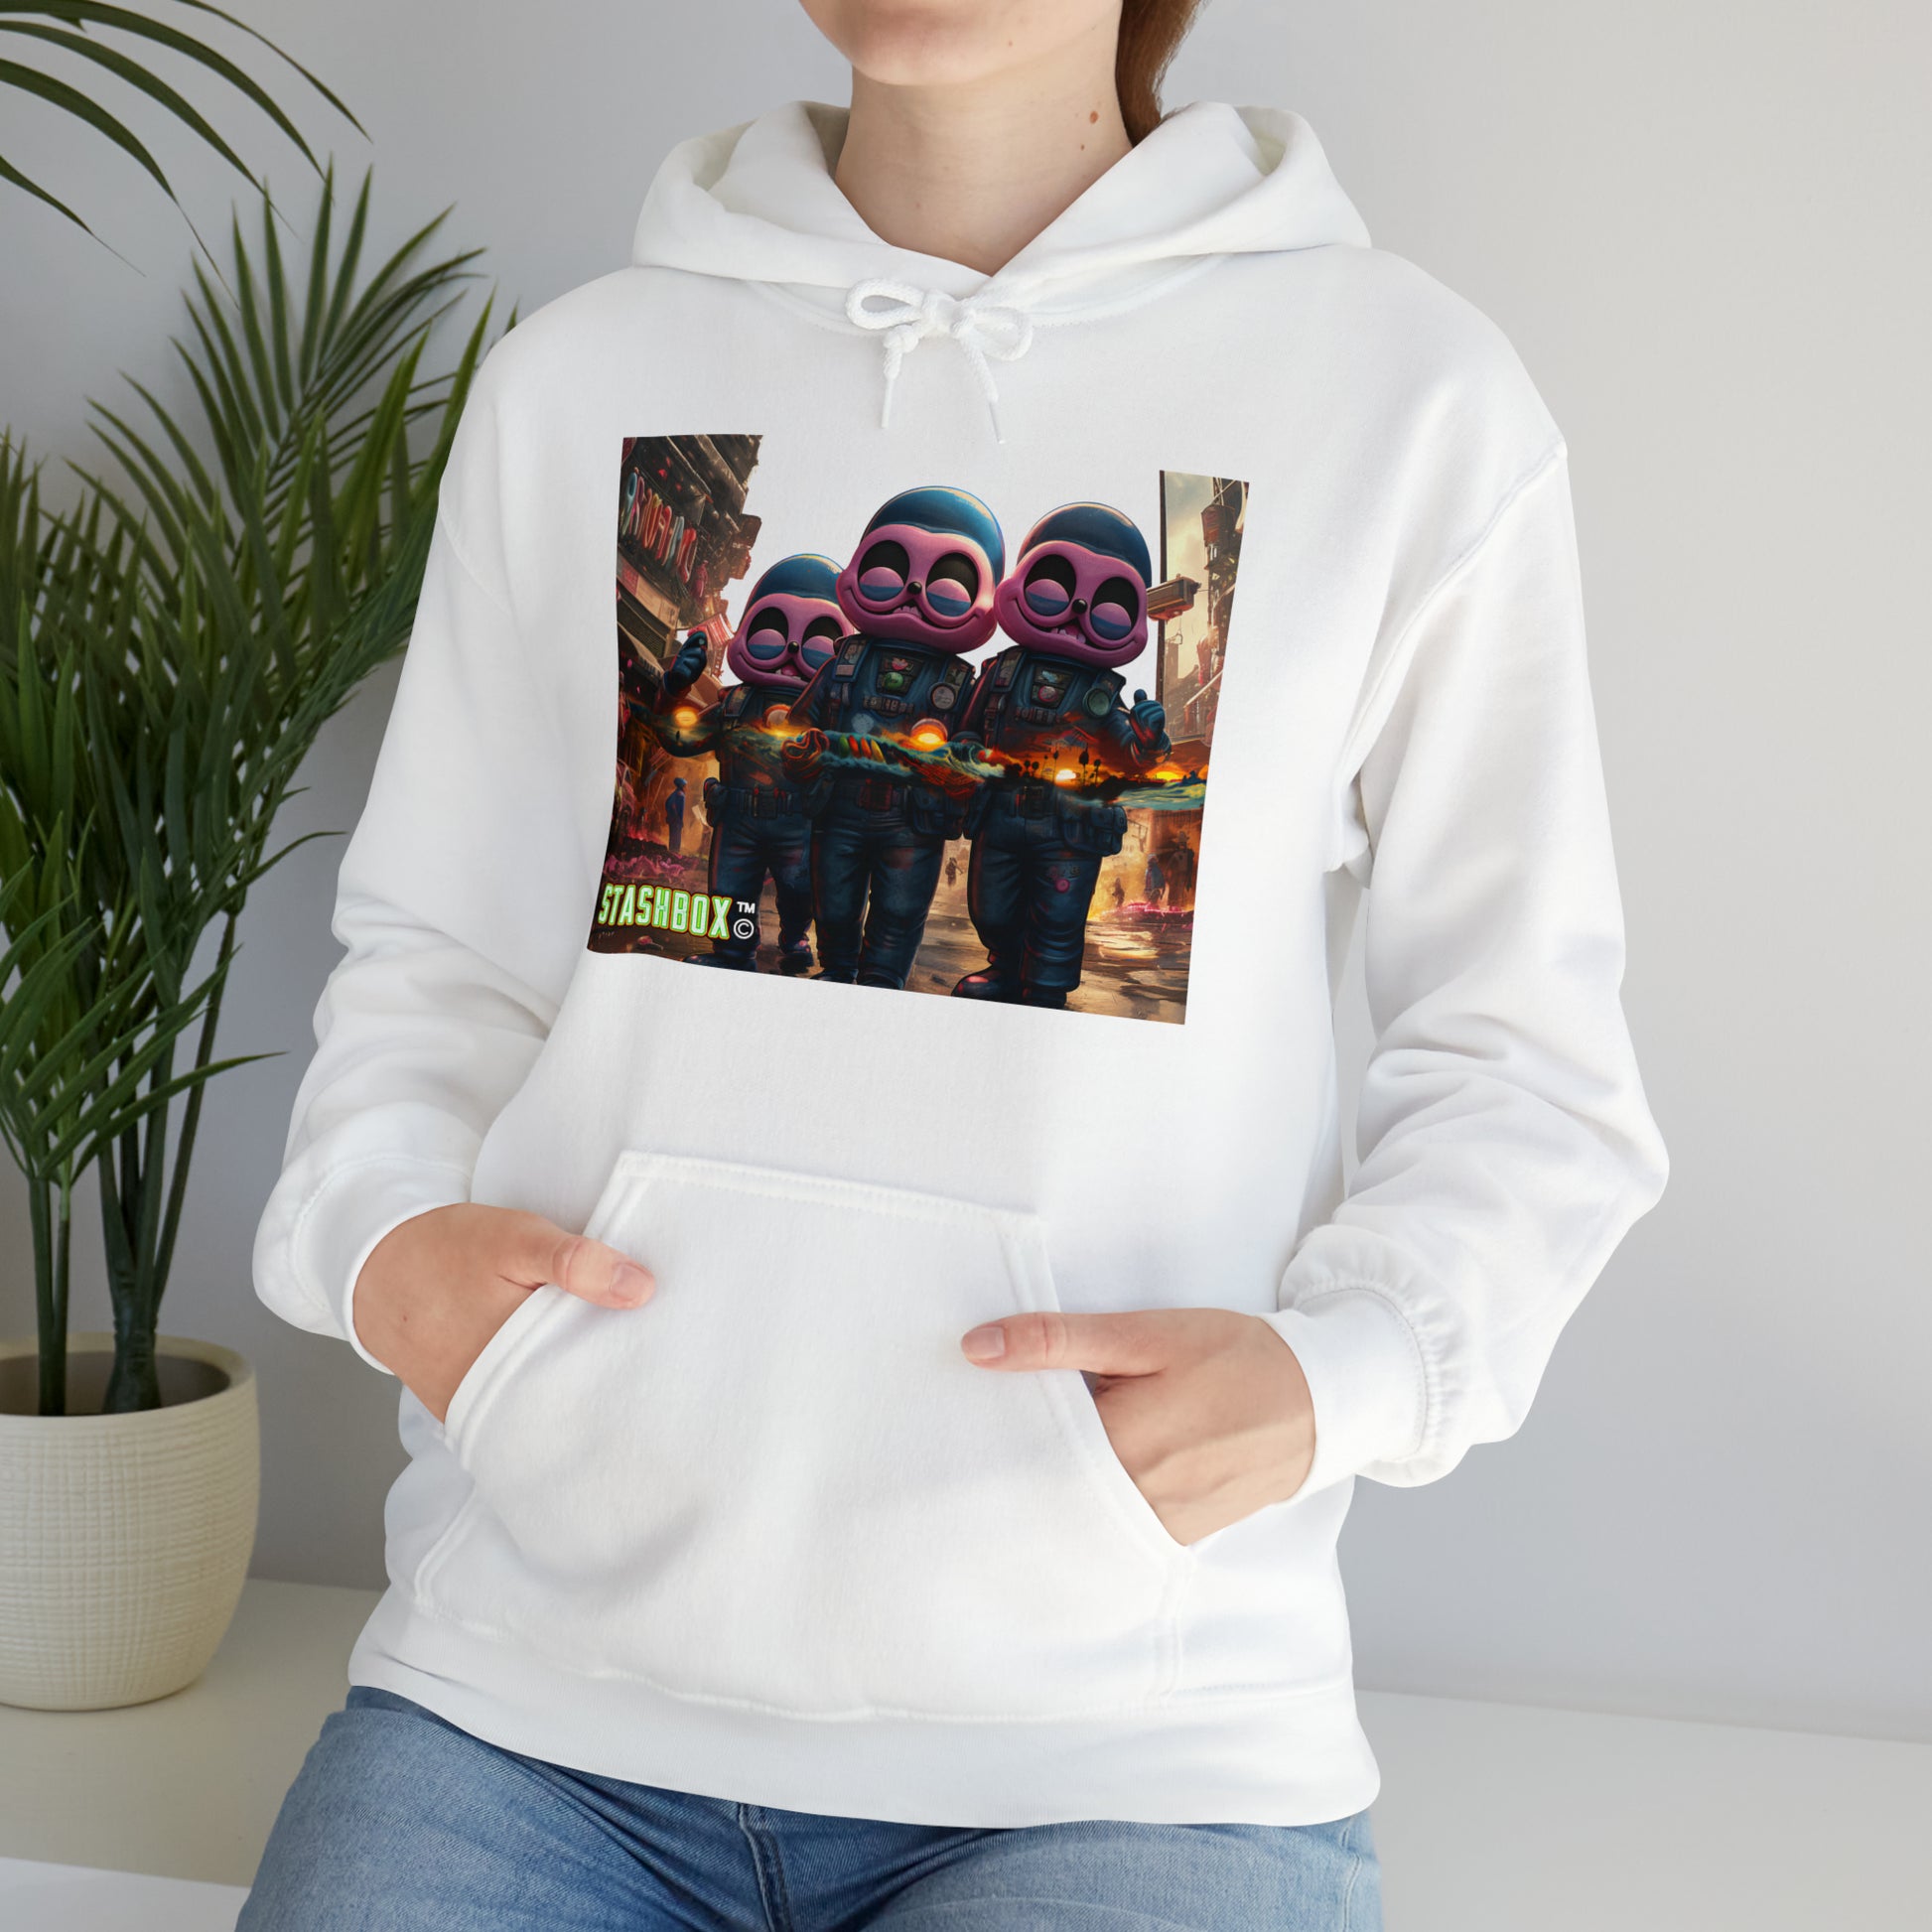 Embrace surreal fashion with Pink City Aliens Holding Tropical Dreams Unisex Hooded Sweatshirt. Aliens and psychedelia unite, exclusively at Stashbox.ai.